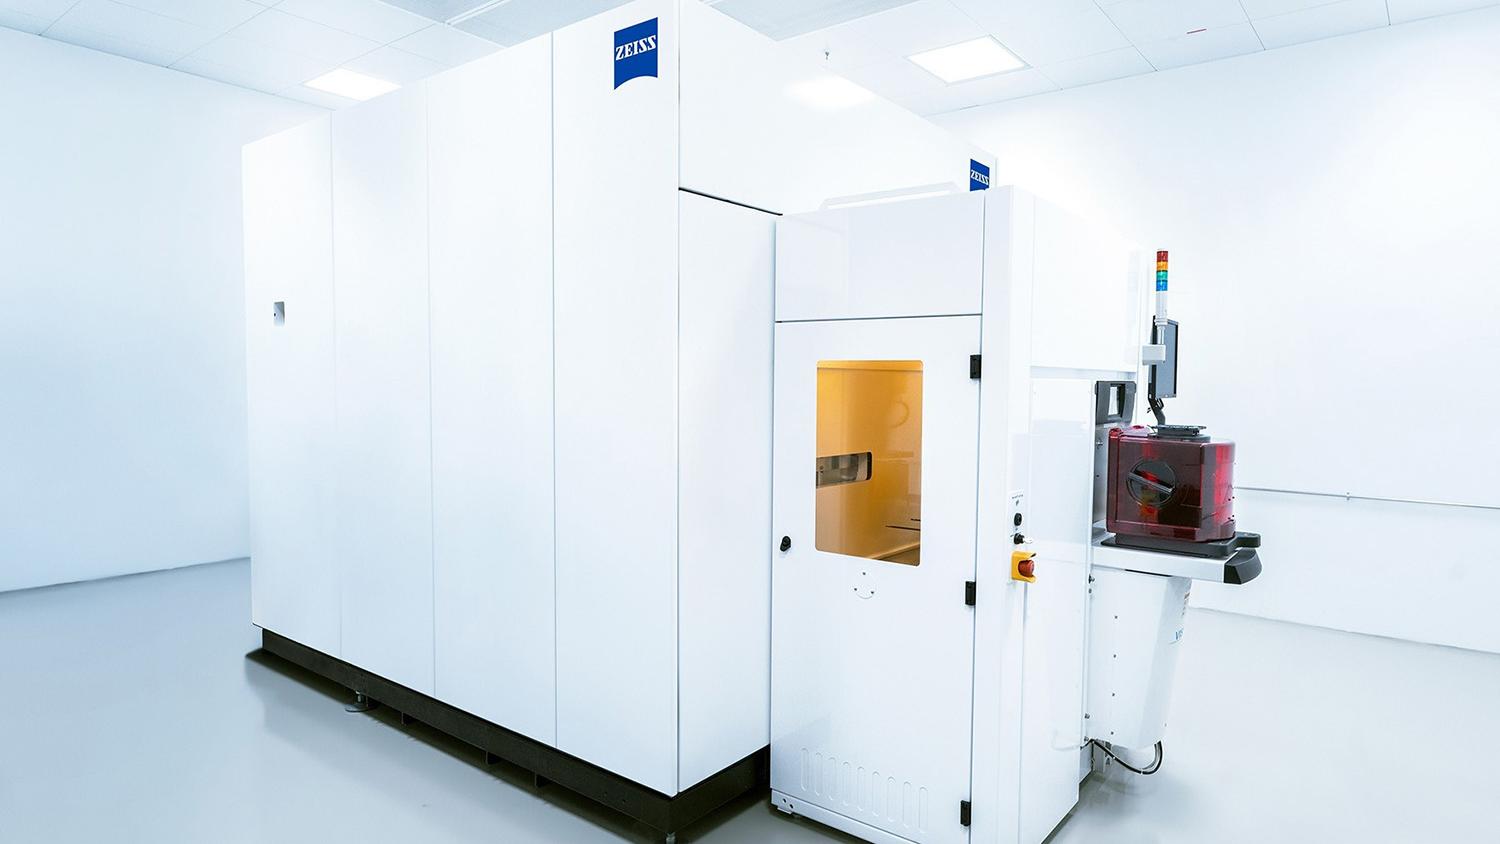 The 3D Workstation of ZEISS SMT visible as whole machine